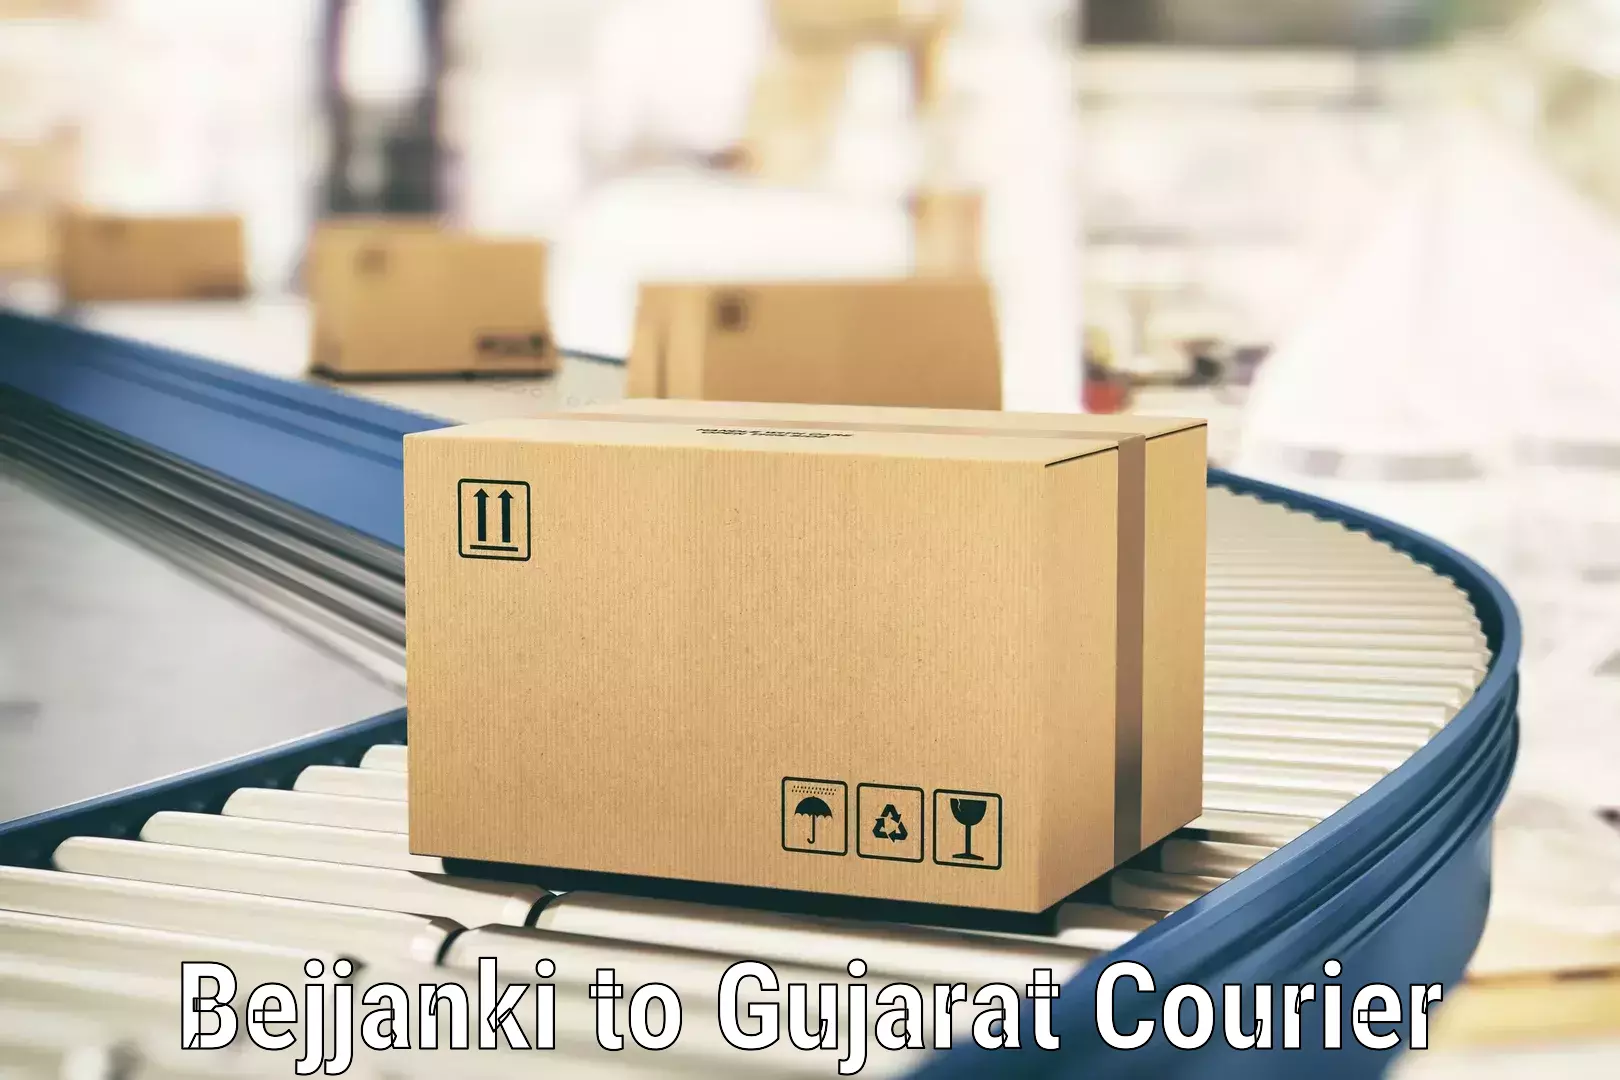 Express package services Bejjanki to Gujarat